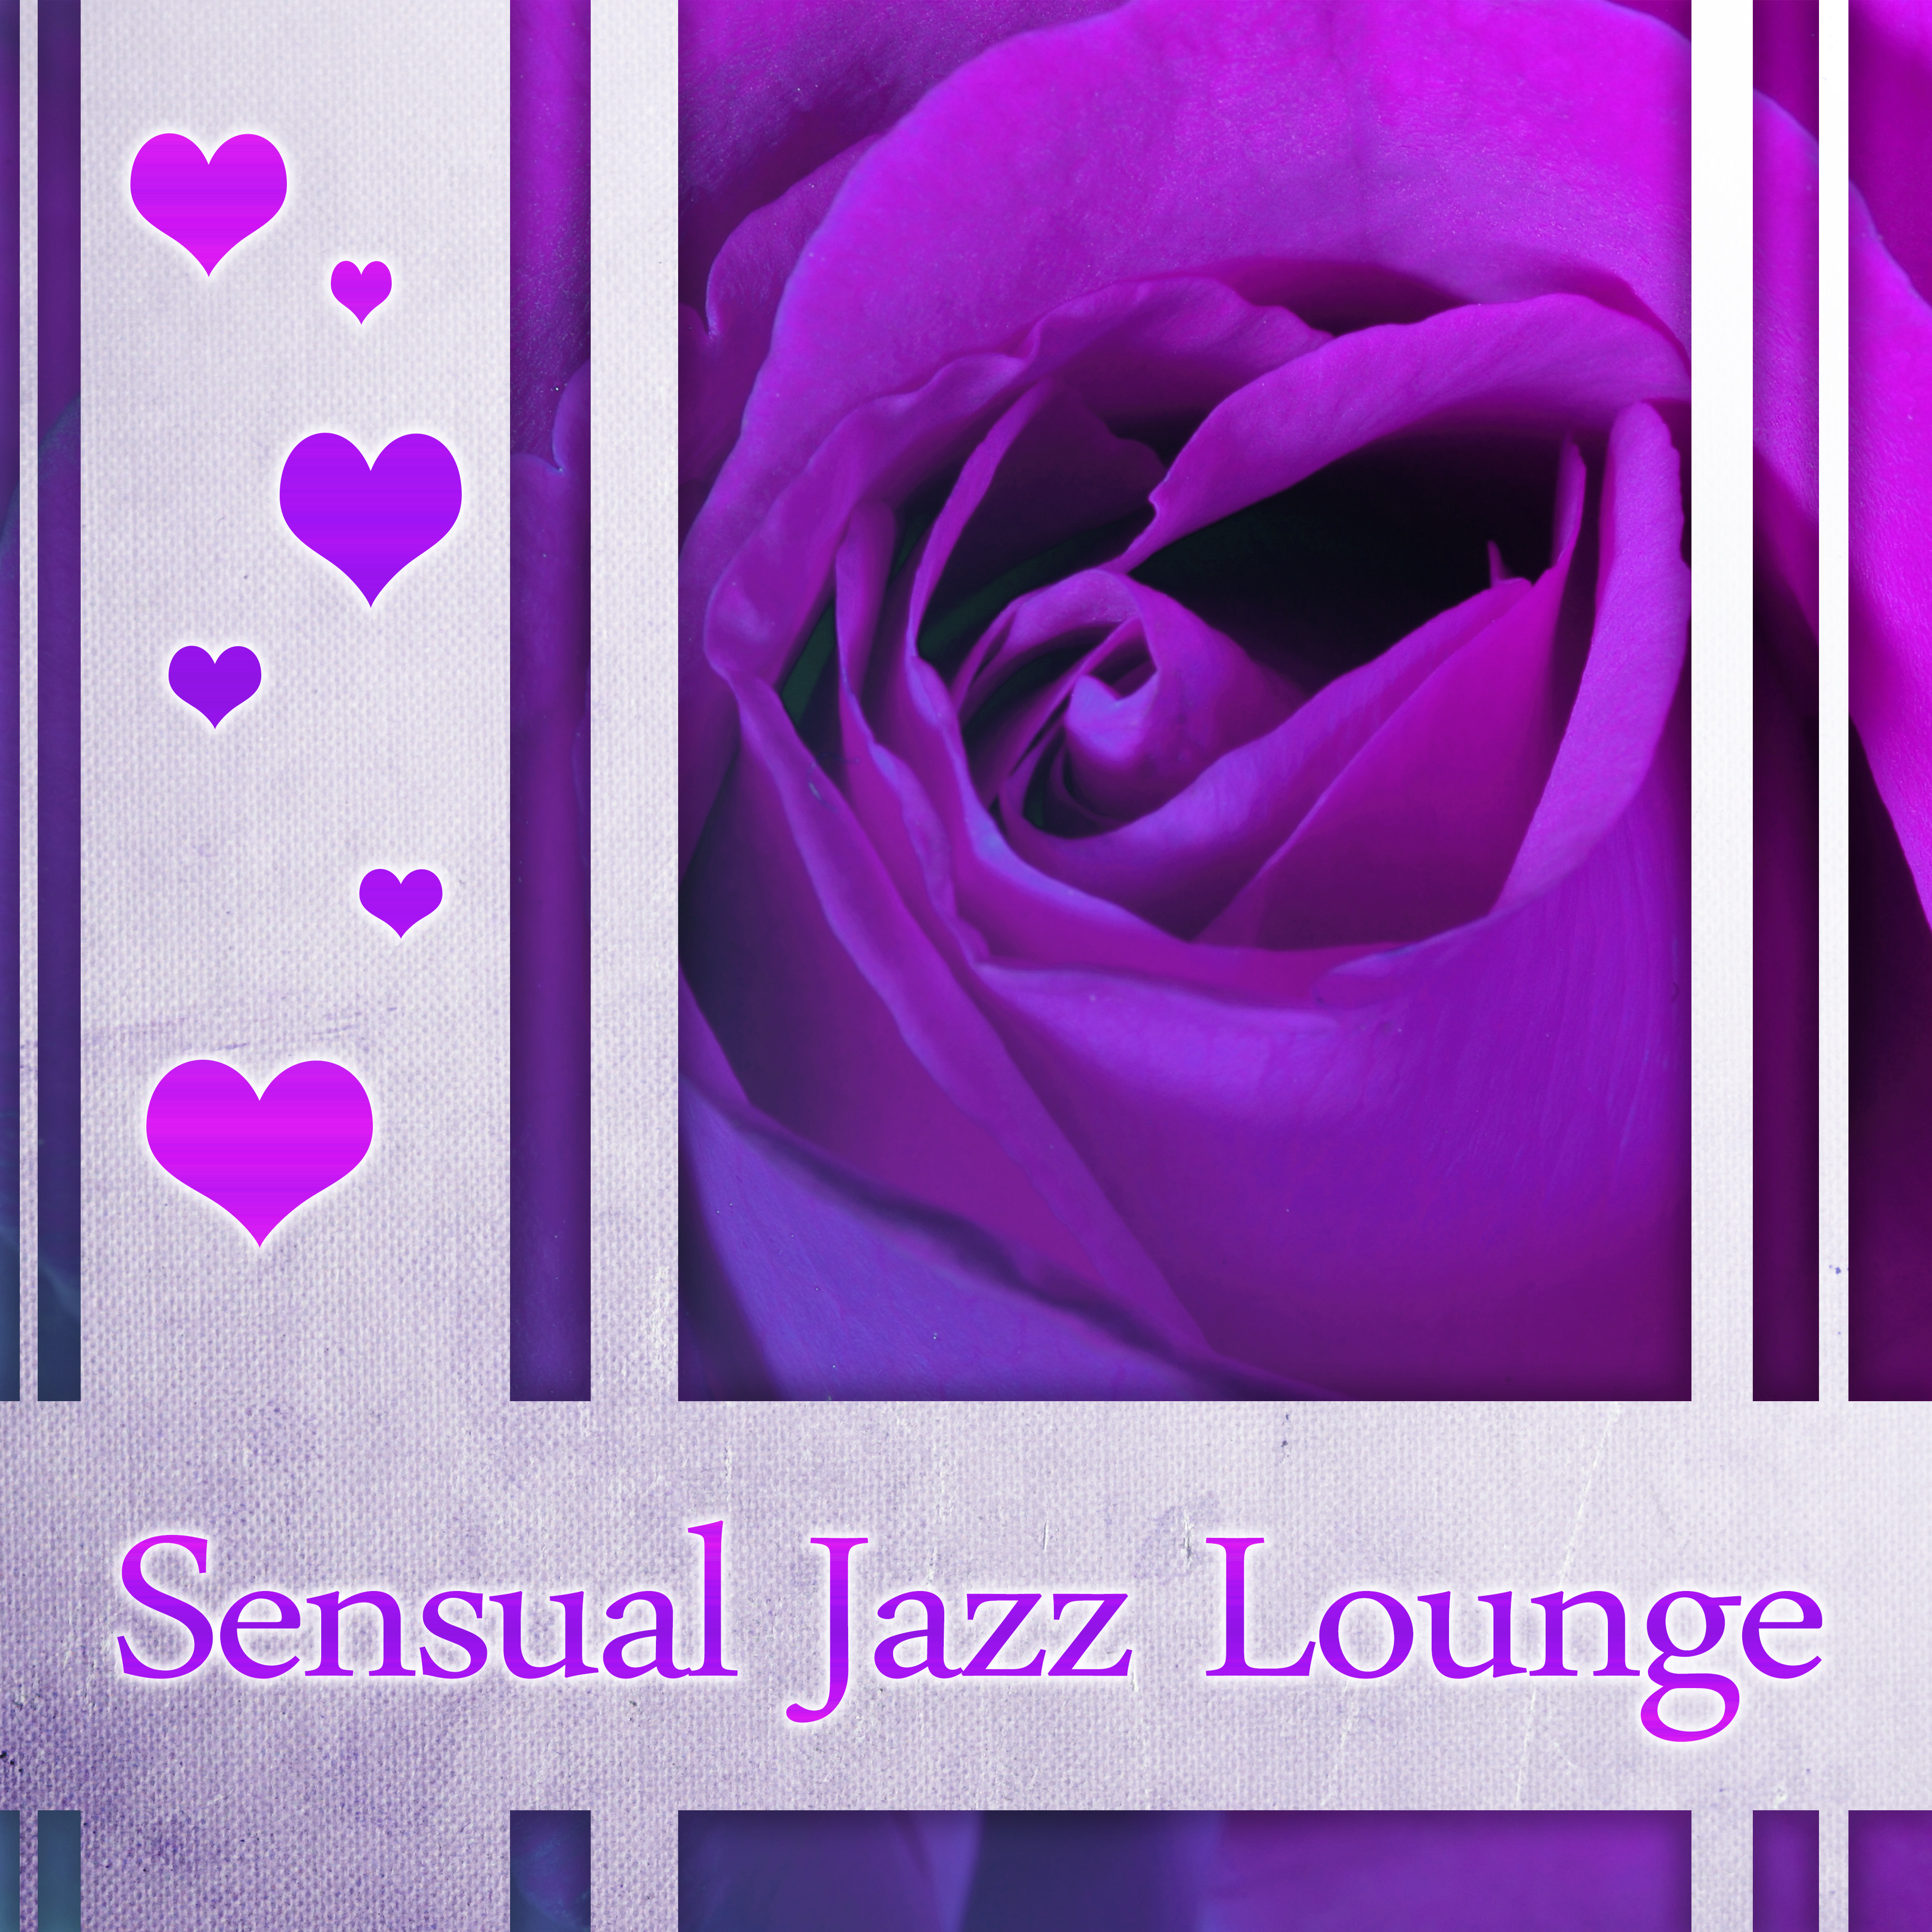 Sensual Jazz Lounge  Romantic Night, Erotic Jazz Music, Sounds to Rest, Peaceful Jazz for Lovers